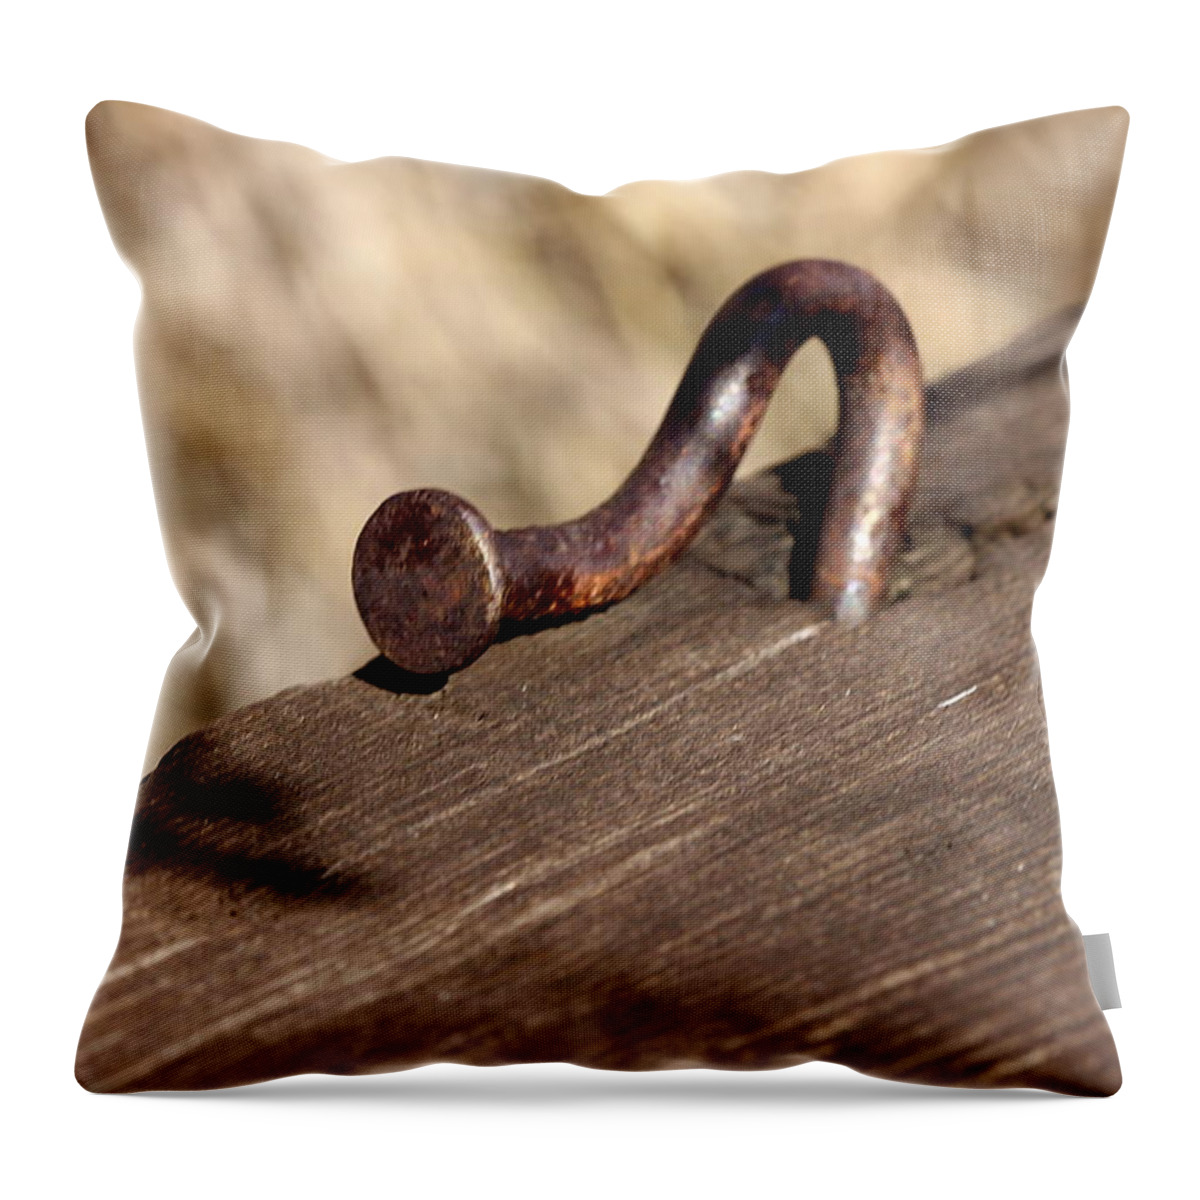 James Smullins Throw Pillow featuring the photograph Bent nail by James Smullins